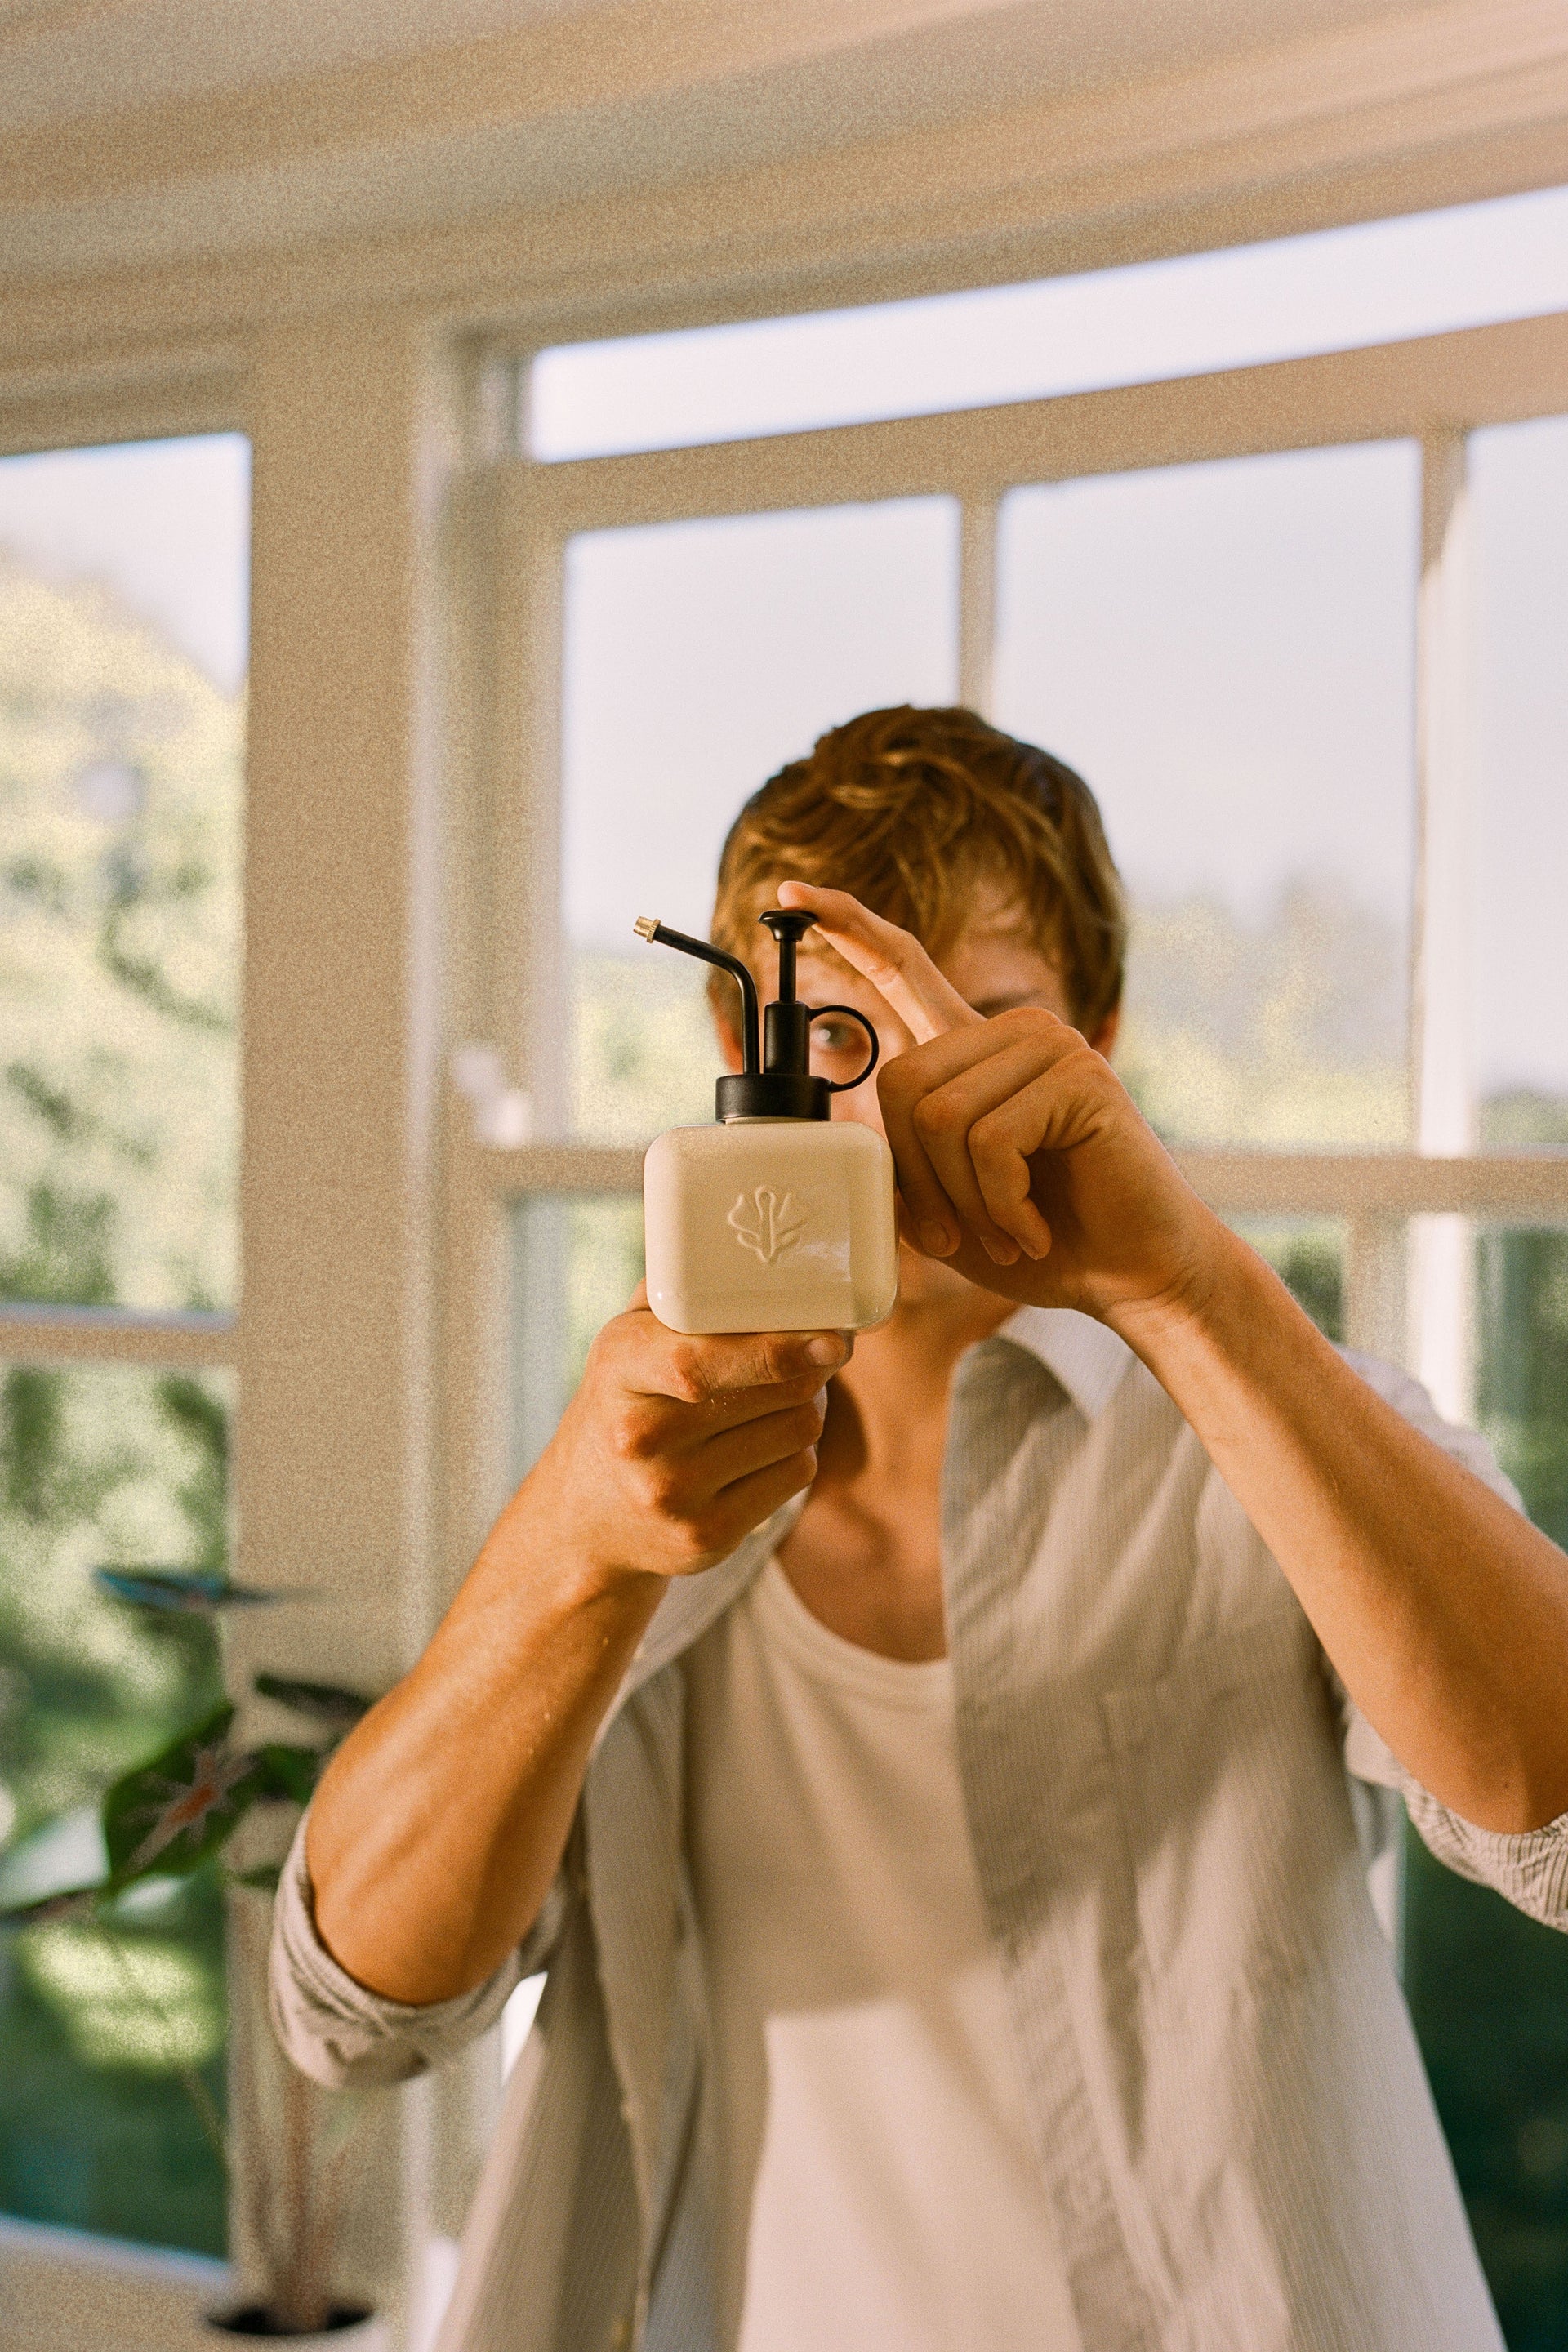 A male model holds Sowvital beige mister on his hands indoors while there were windows in the background.